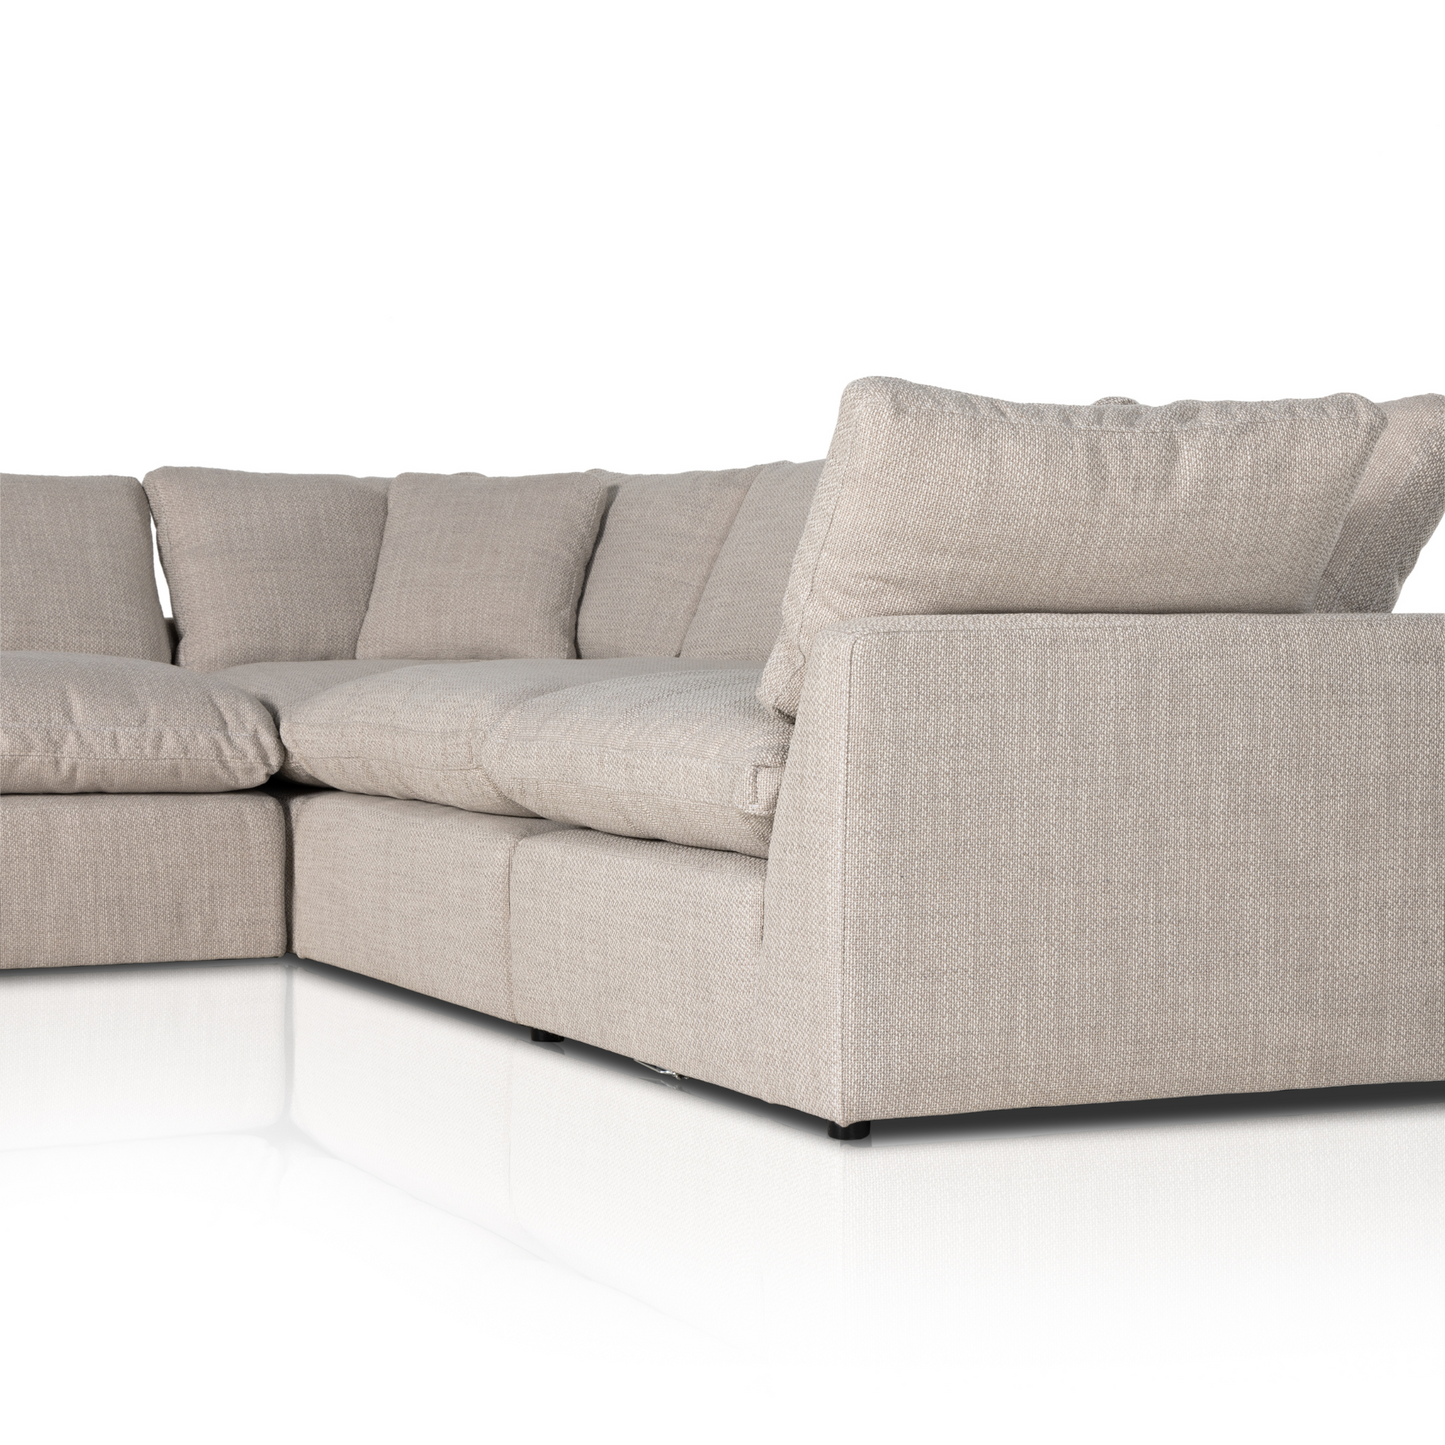 STEVIE 5 PIECE SECTIONAL